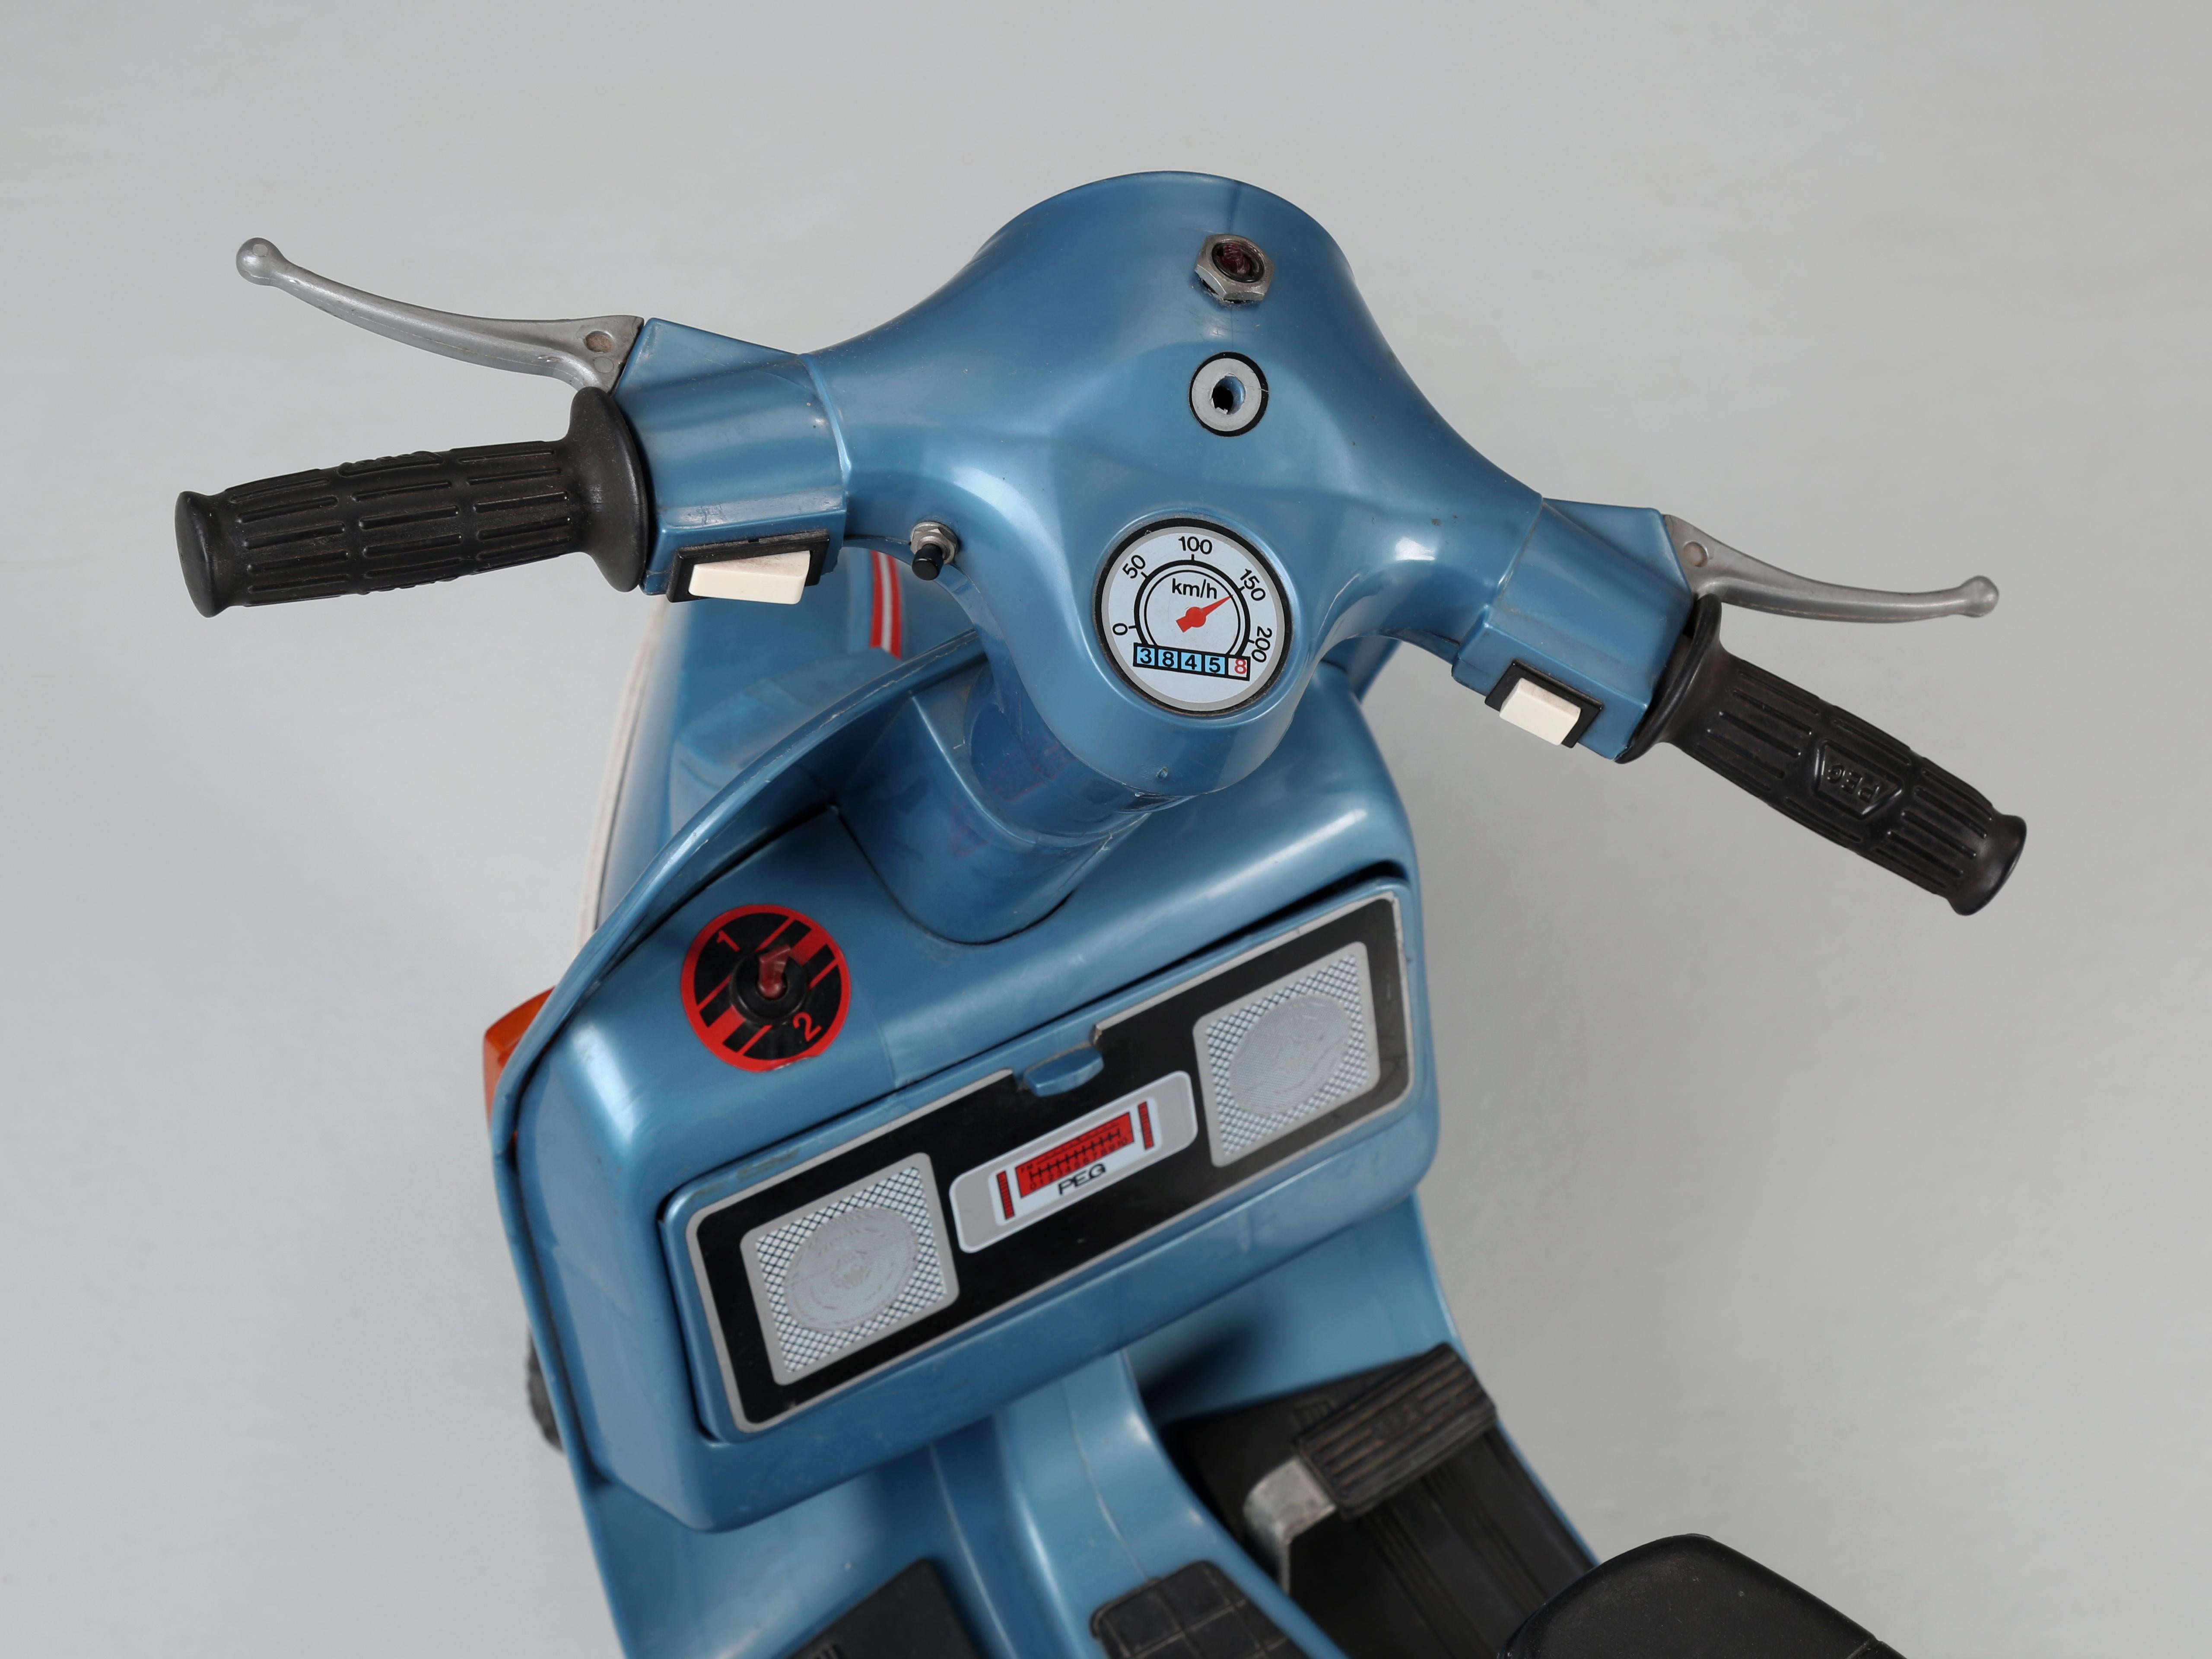 Hand-Crafted Child's Battery Operated Vespa Scooter Made in Italy by Peg Perego for Ages 3-Up